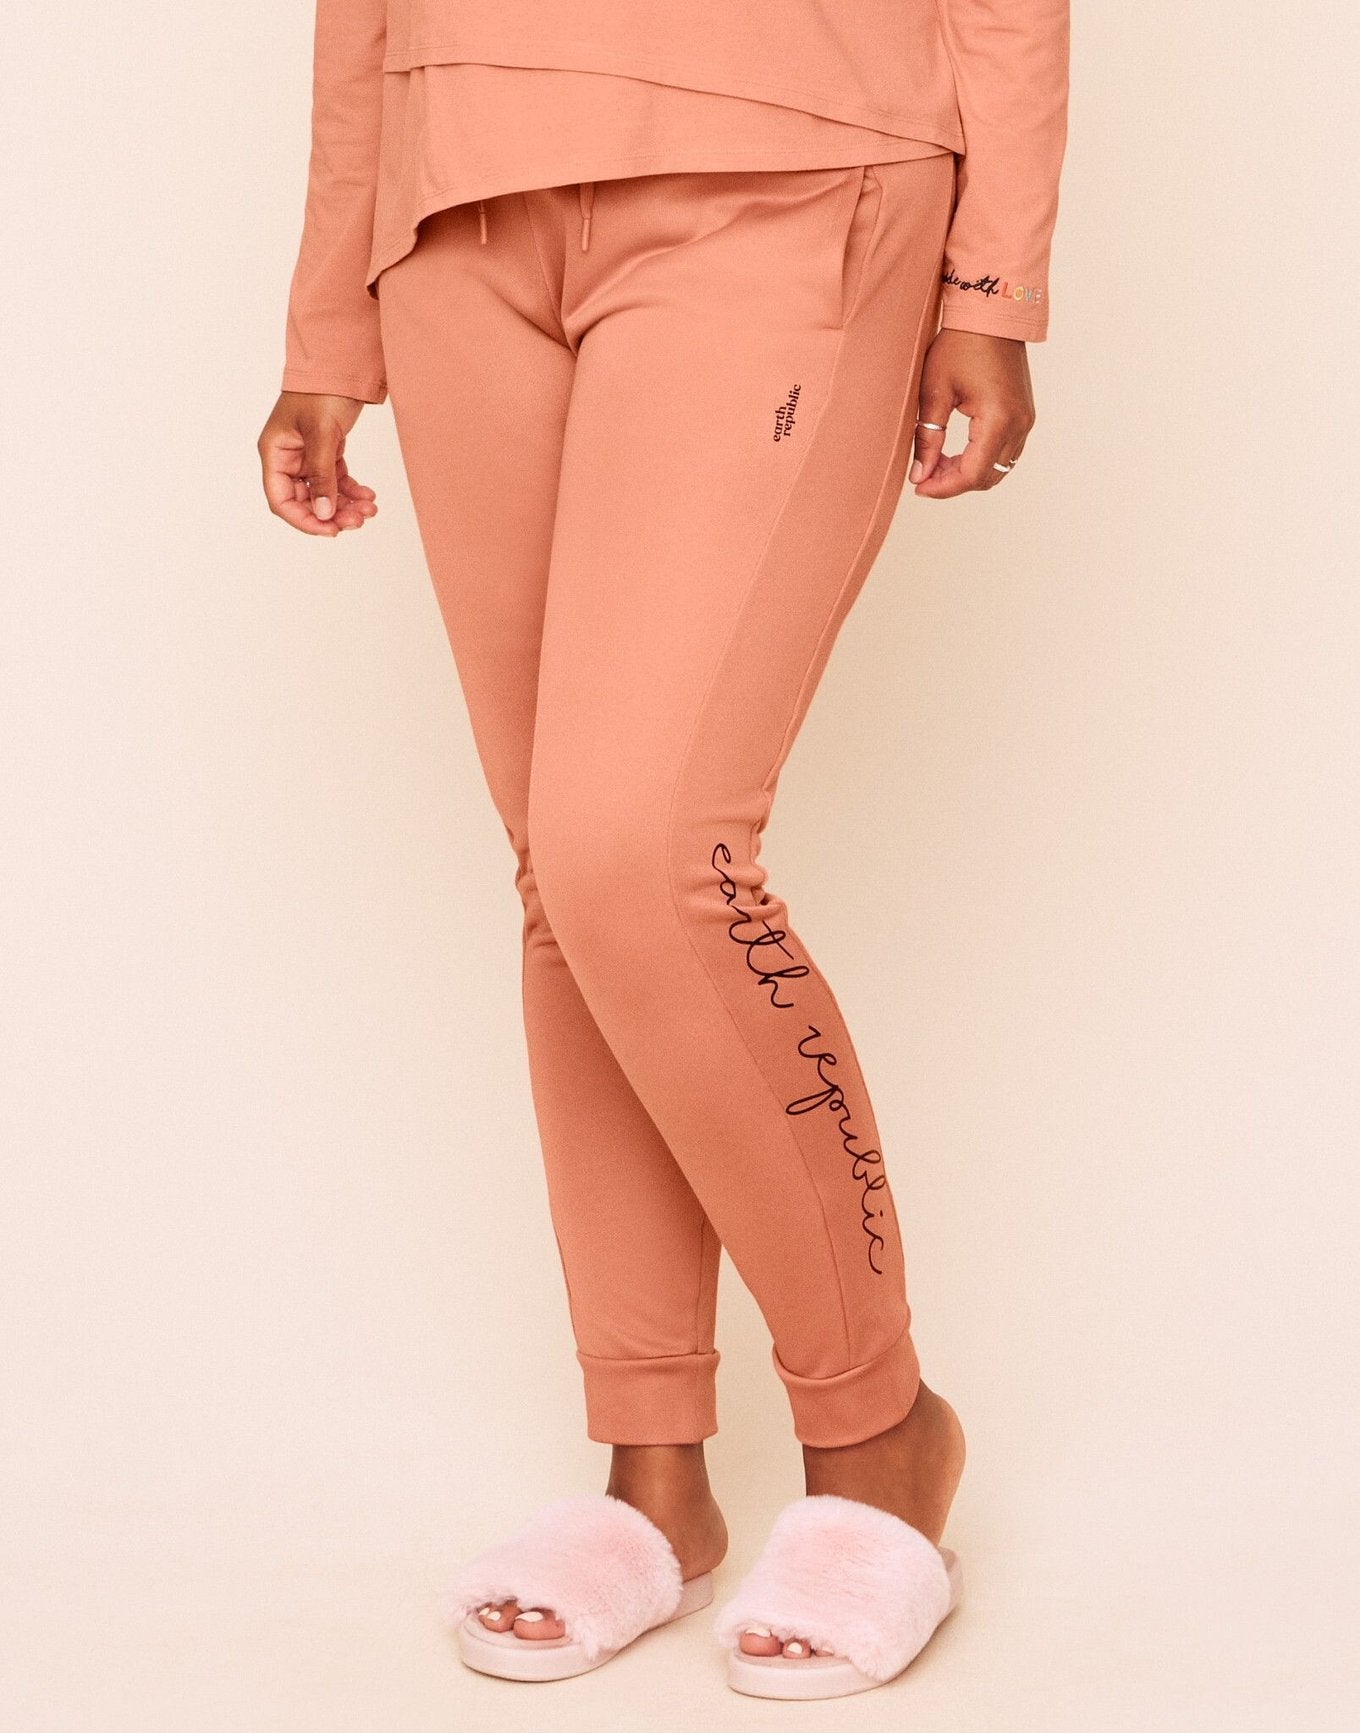 Earth Republic Shawn Jogger Pant Joggers in color Rhododendron Marl and shape jogger